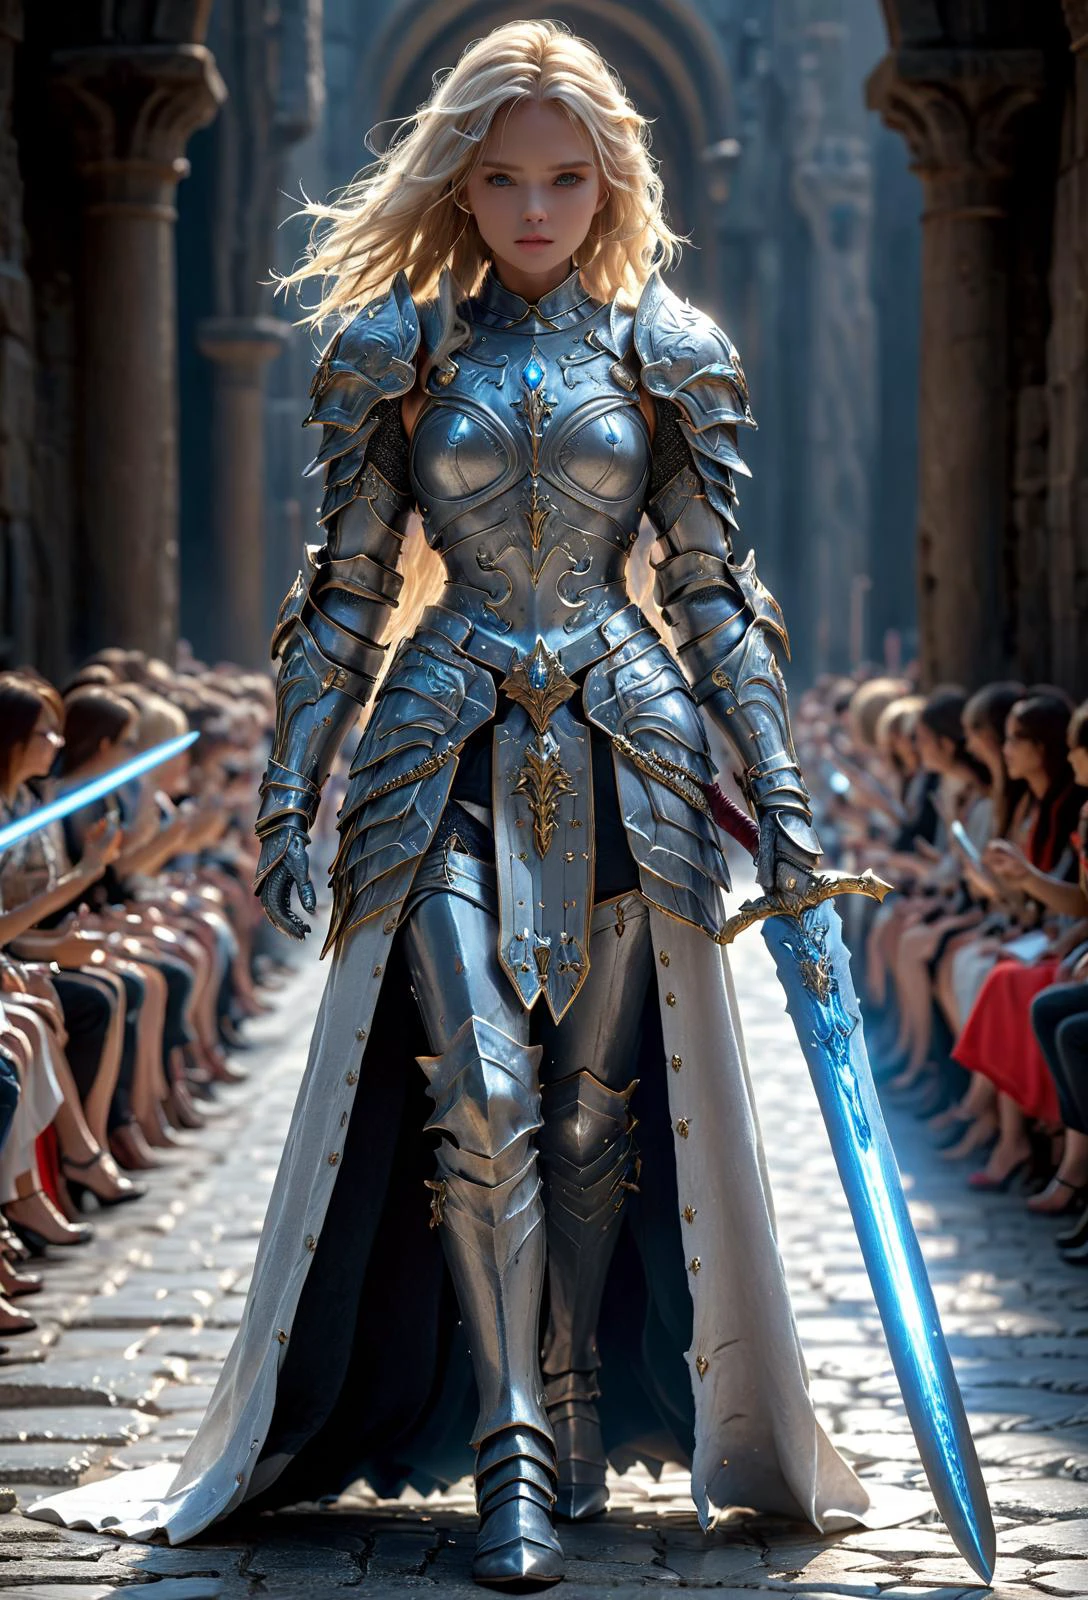 amazing quality, masterpiece, best quality, hyper detailed, ultra detailed, UHD, perfect anatomy, 
fashion show, model, stylish pose, wearing fantastic armor, silver armor, holding glowing sword, runway, stone road, soft shades, blond hair, hand up,
HKStyle,
extremely detailed,